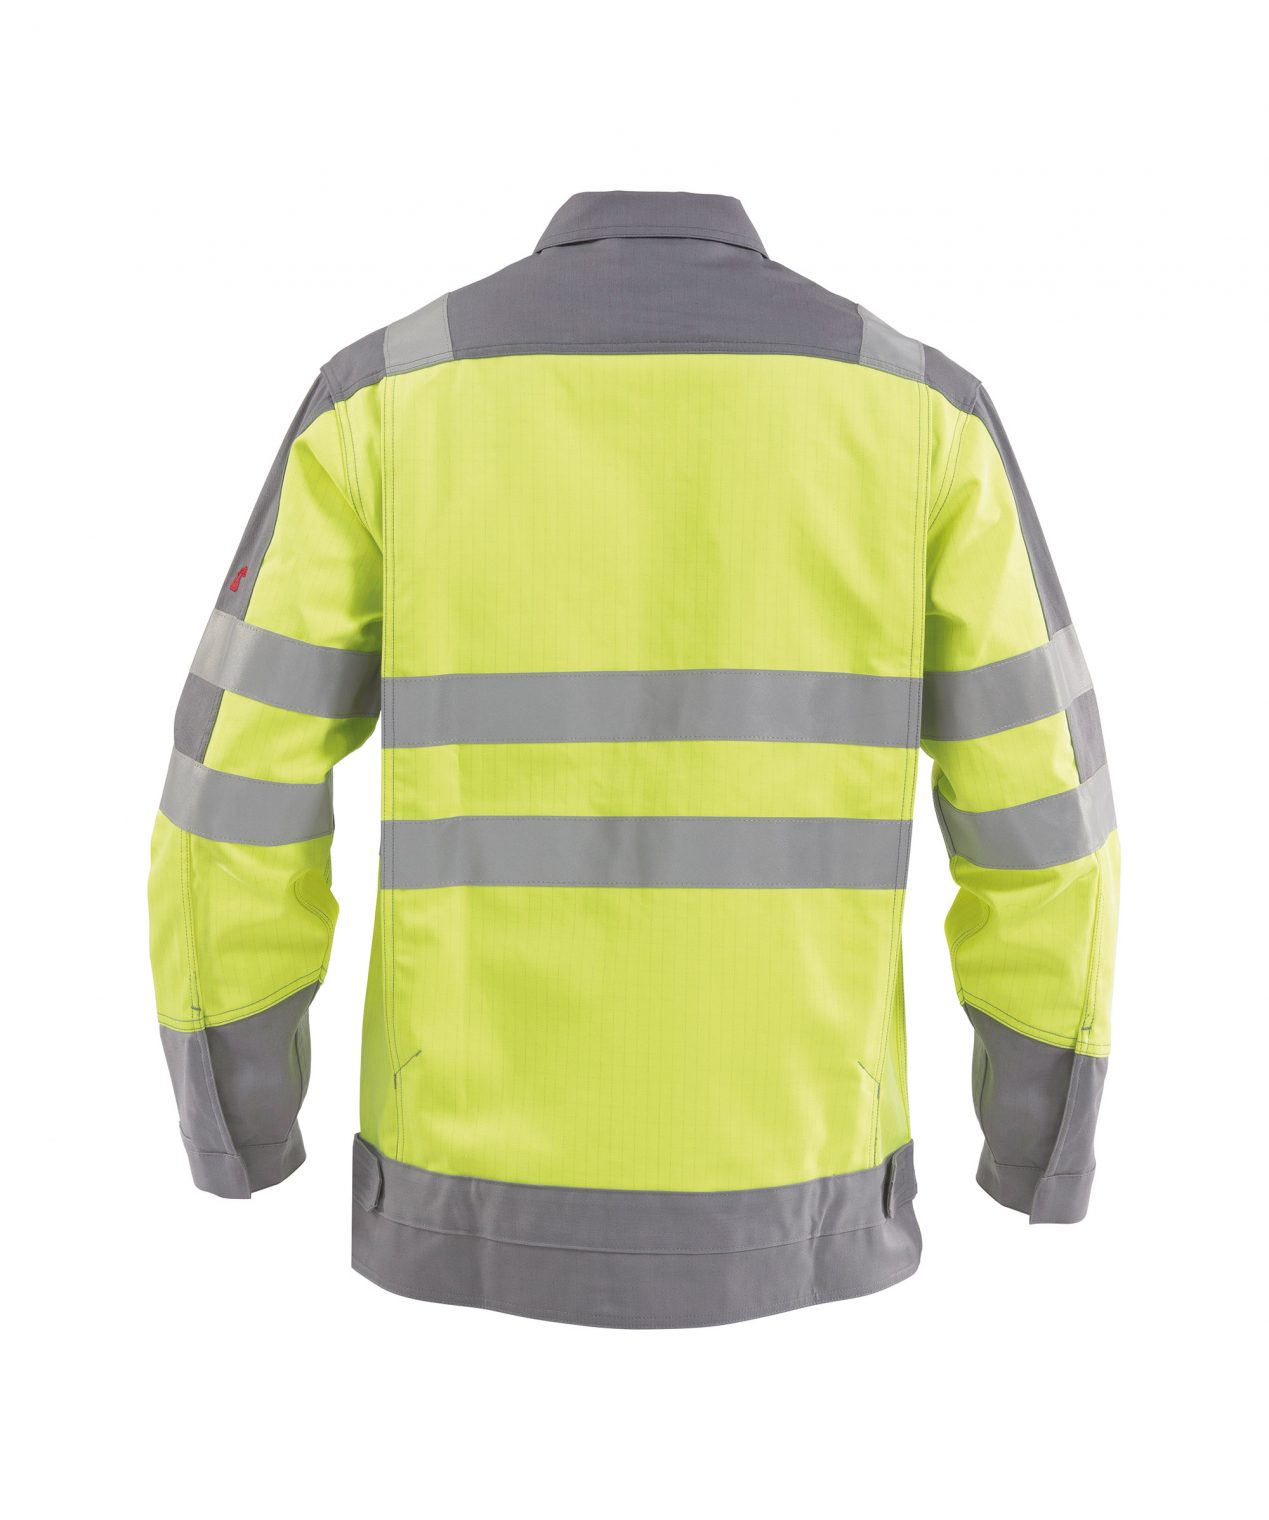 franklin multinorm high visibility work jacket fluo yellow graphite grey back